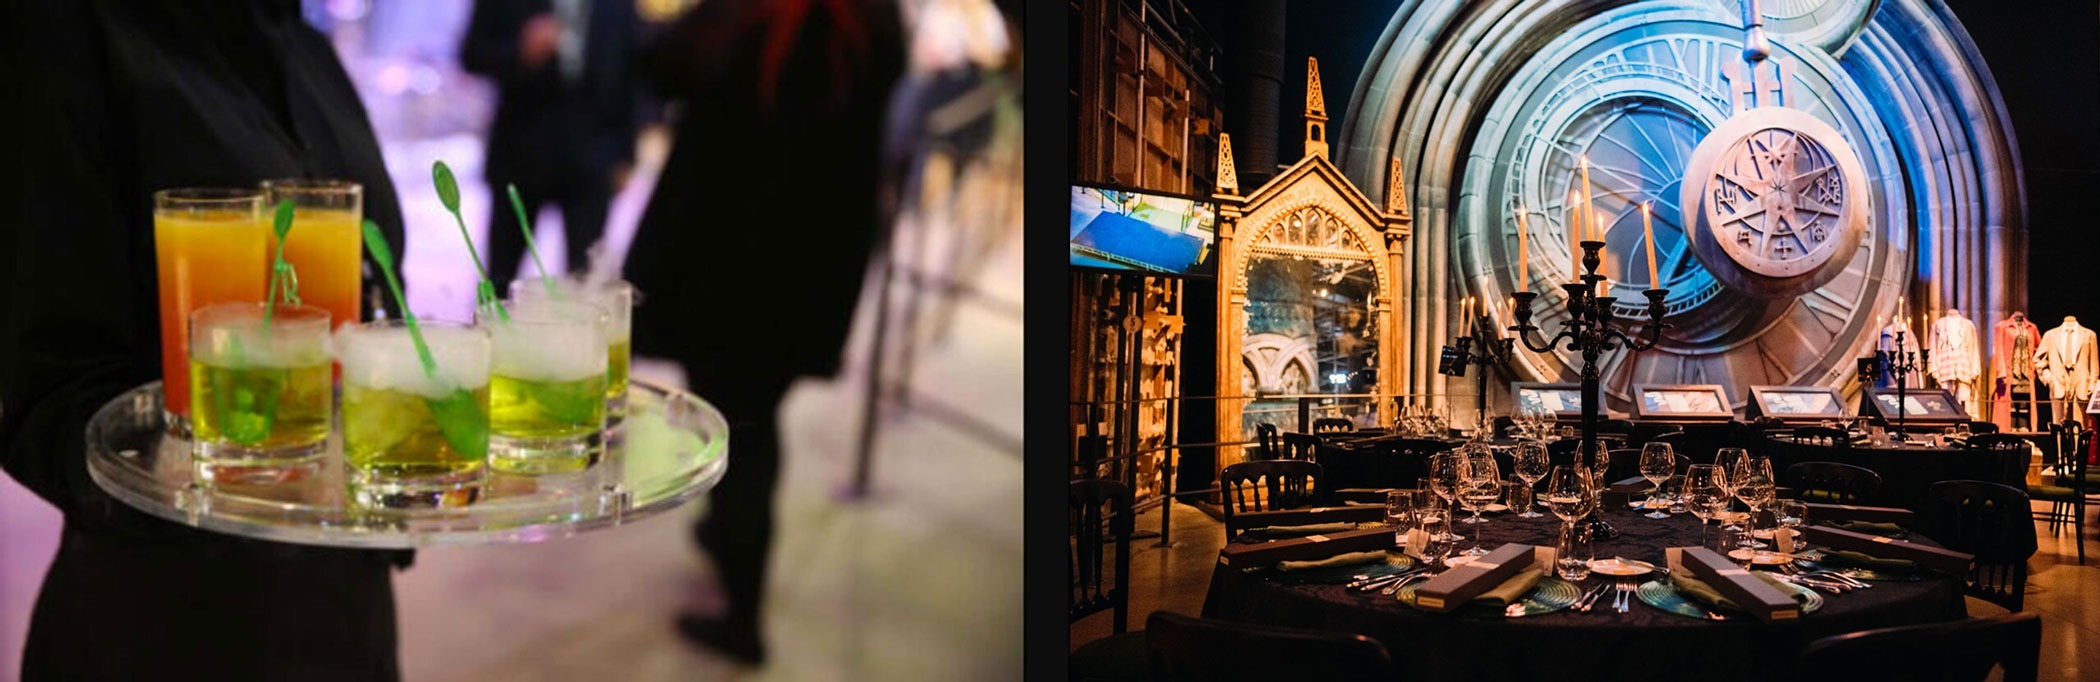 Photos from the Hogwarts After Dark event at Warner Bros. Studio Tour London